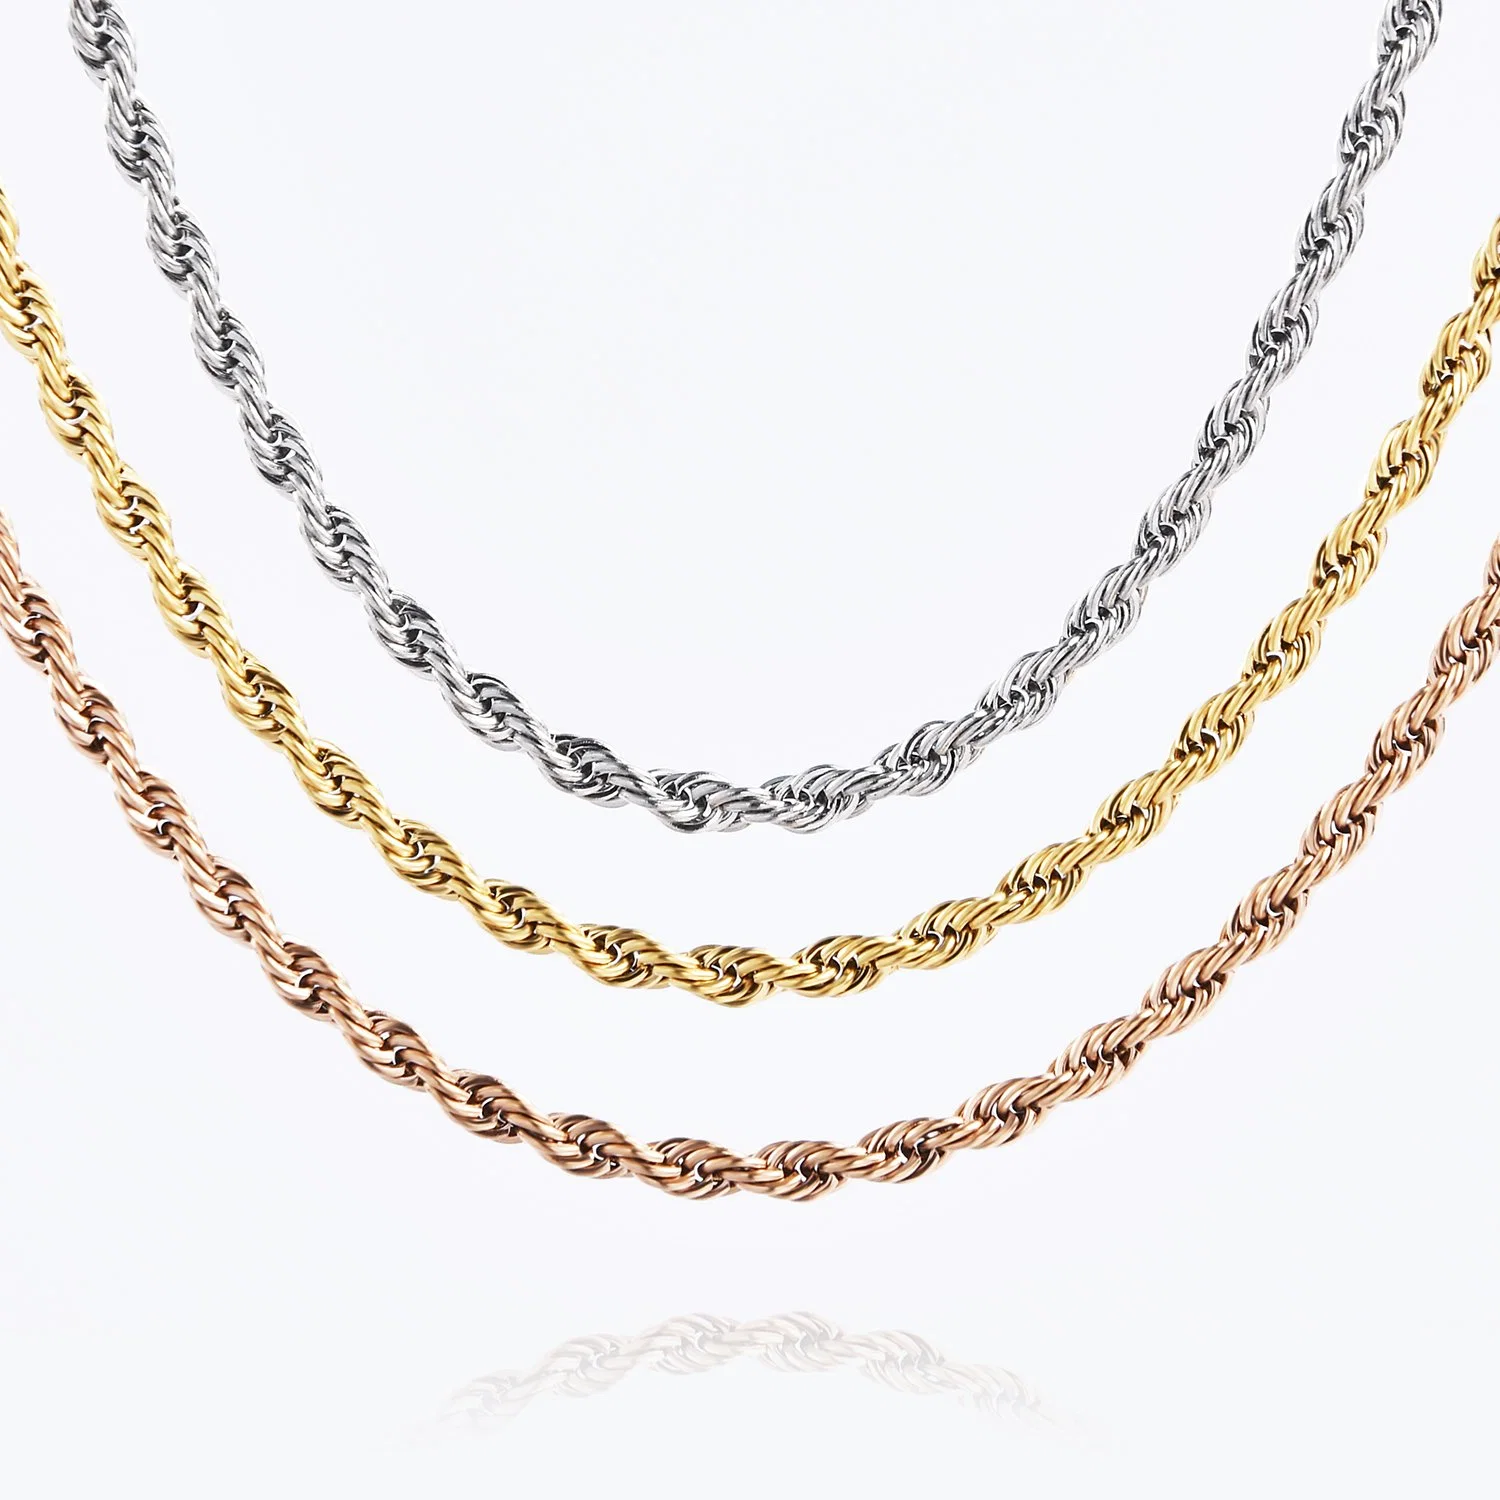 Wholesale/Supplier Fashionable Accessories 18K Gold Plated Rope Chain for Bracelet Anklet Layering Necklace Jewellery Design